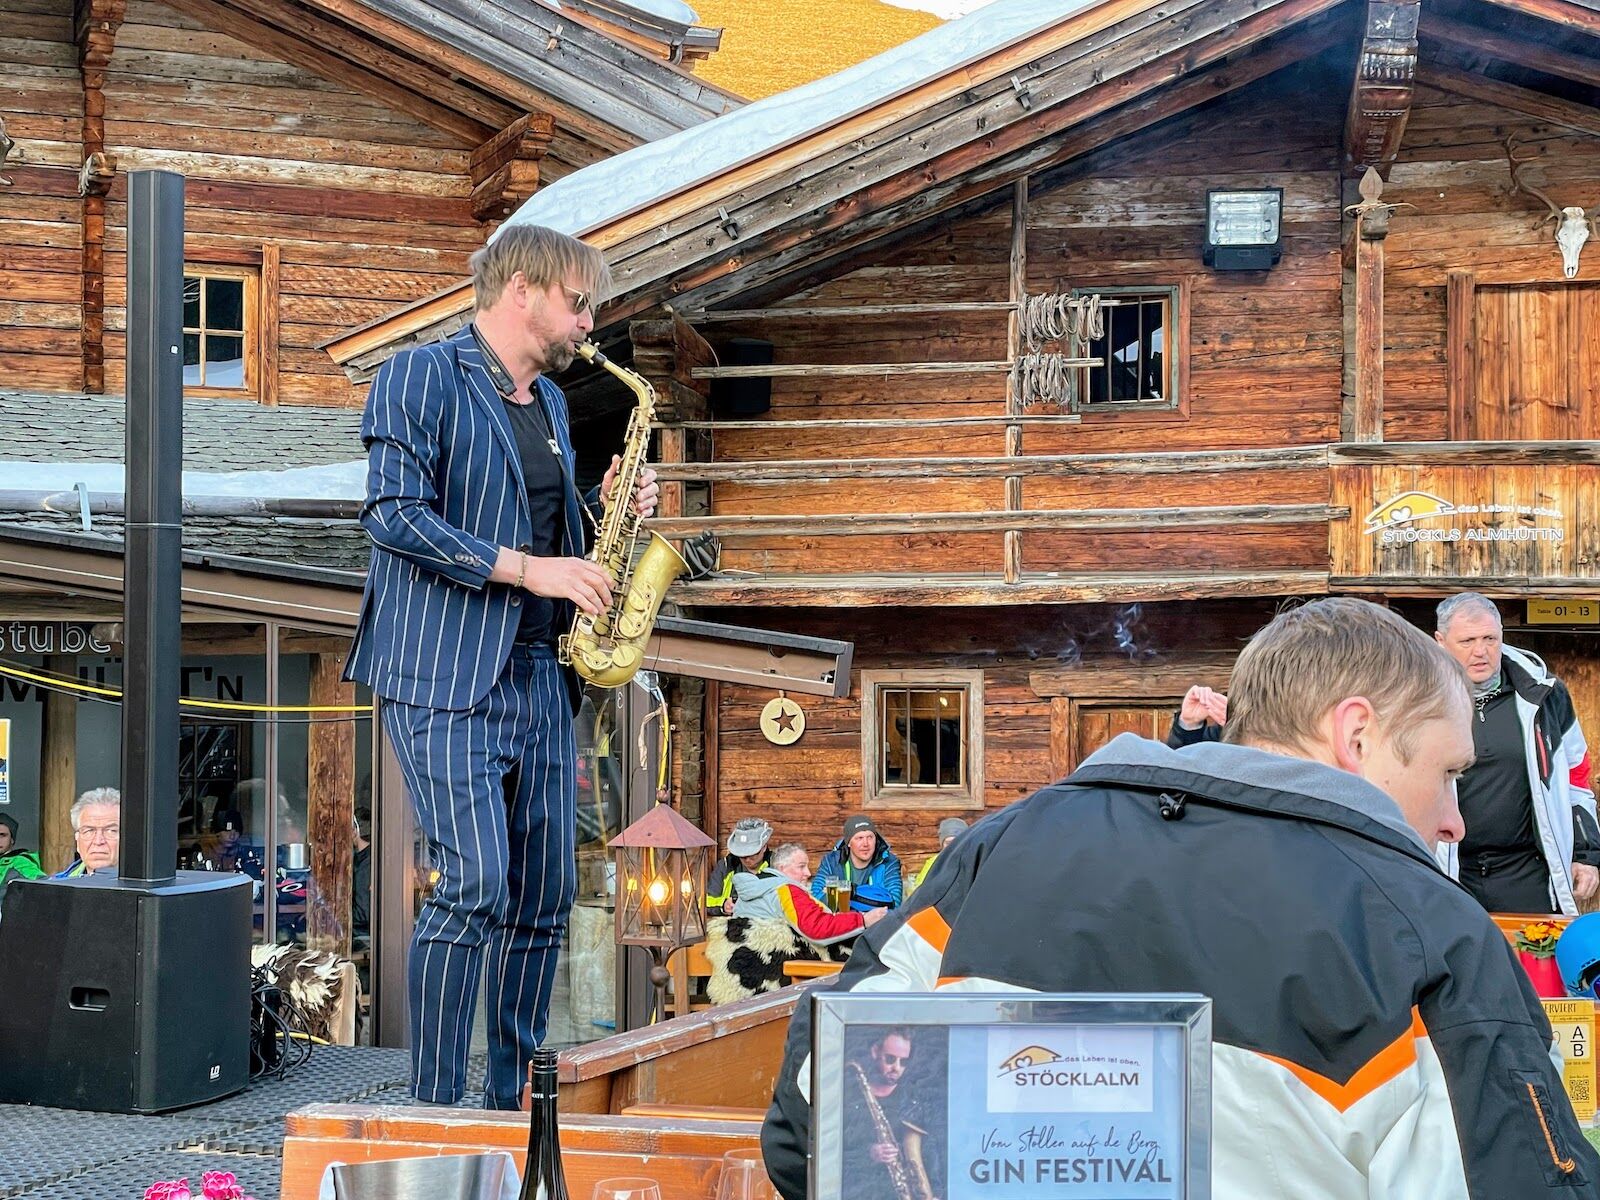 skiing in the alps - jazz sax